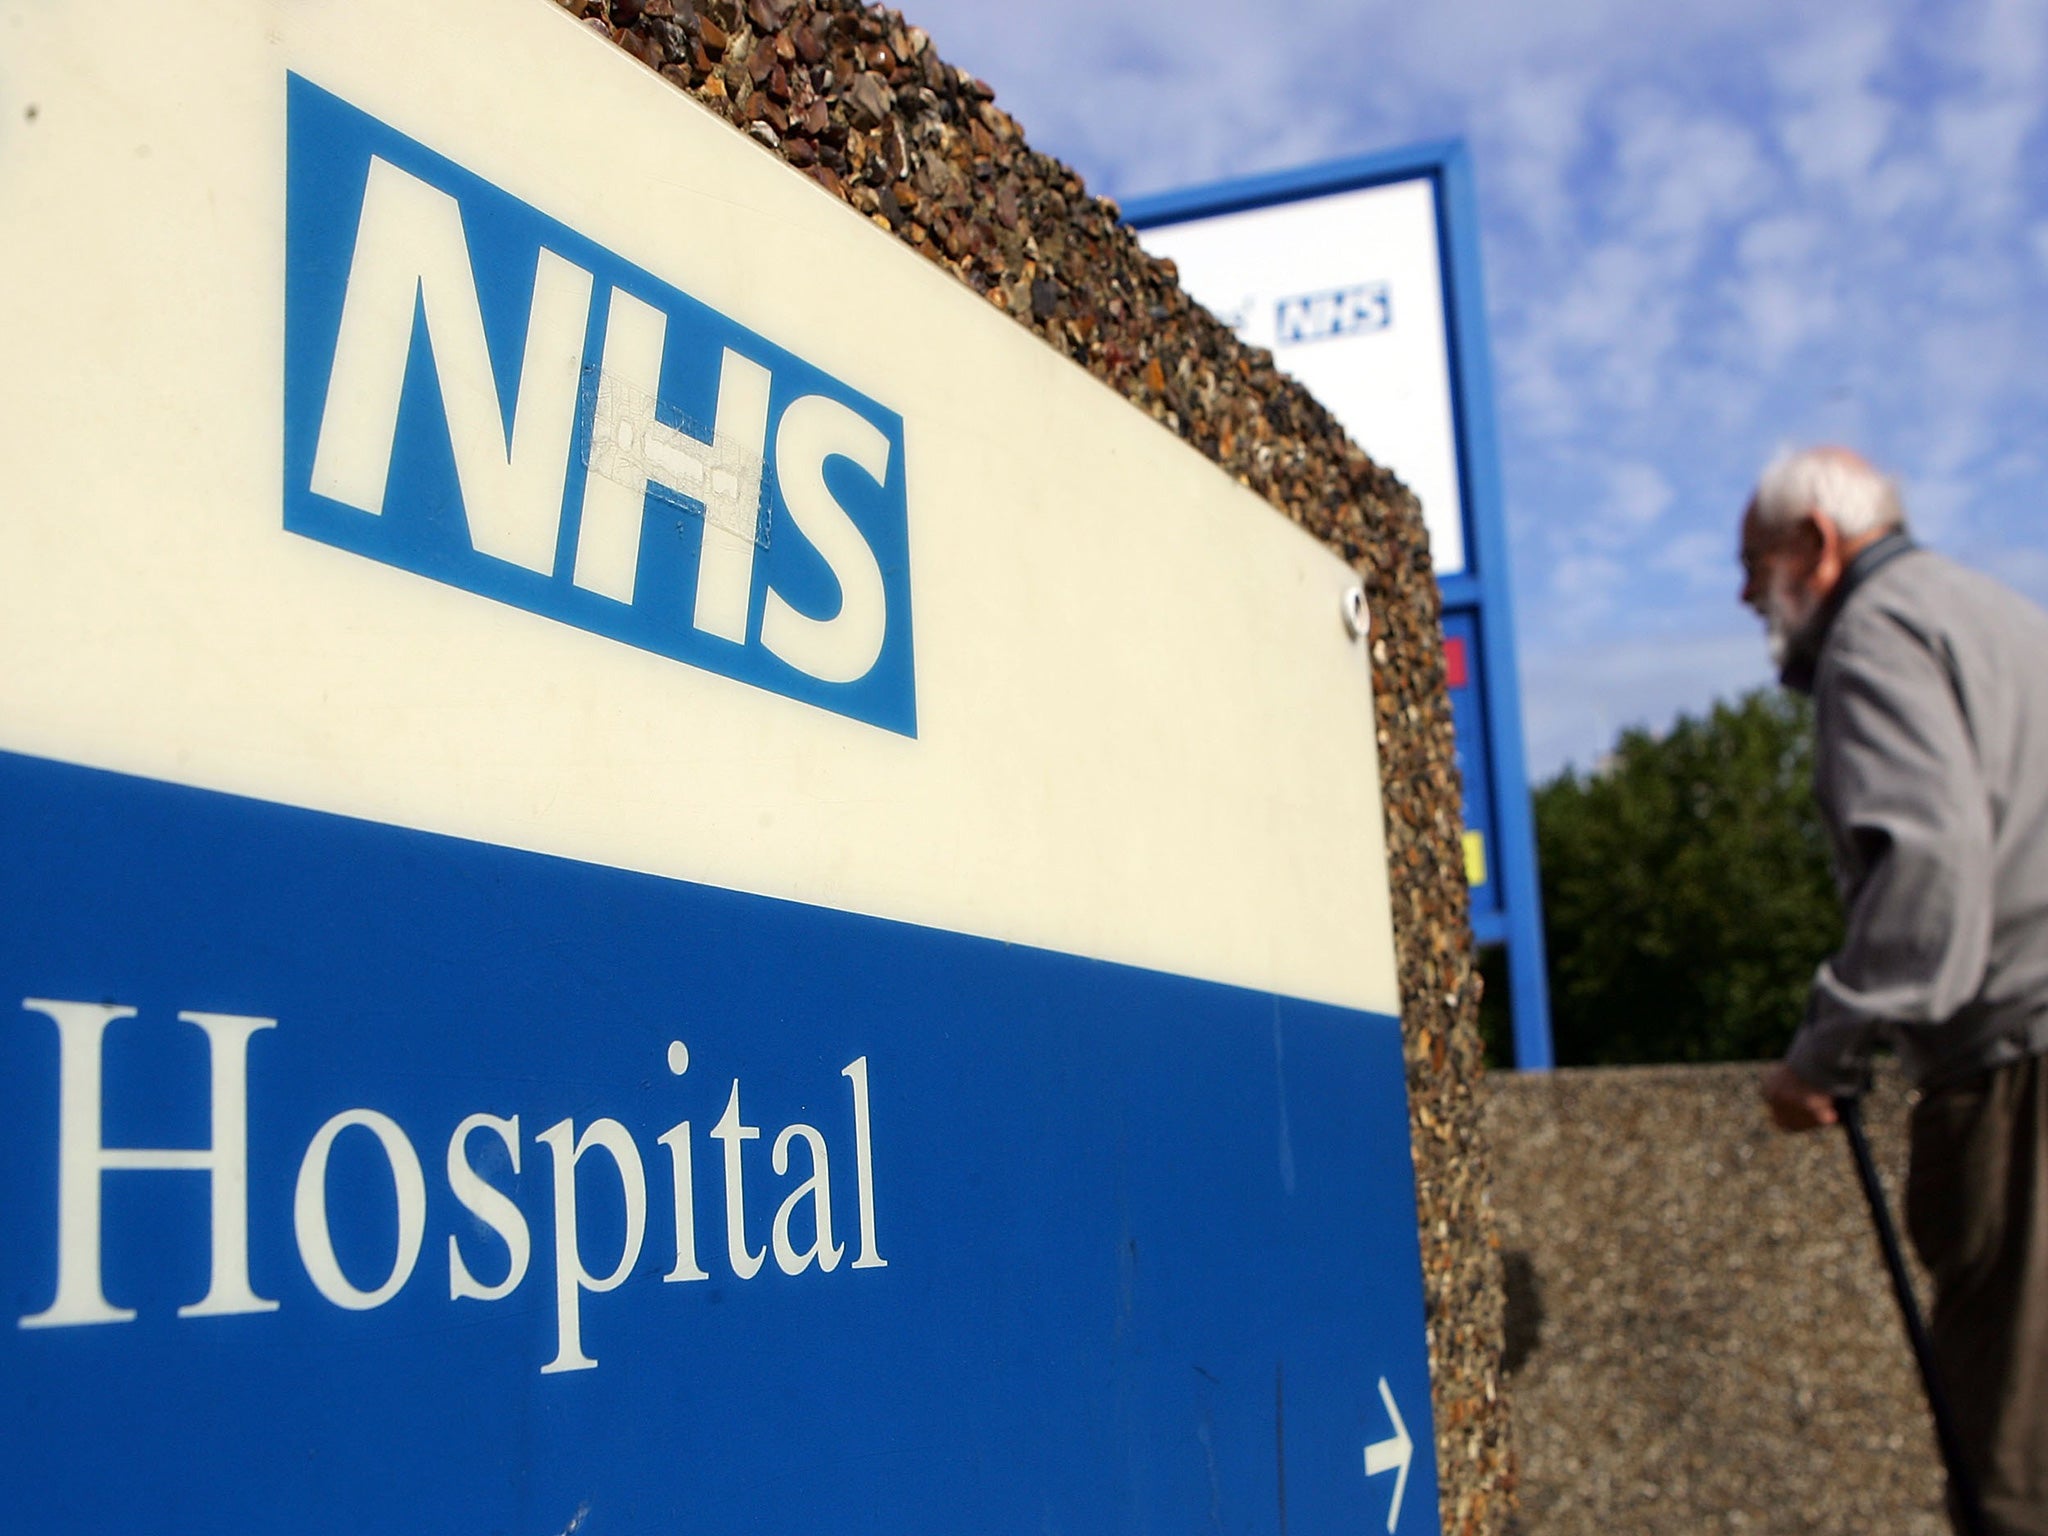 The NHS is reportedly set to reveal a deficit of £1.5bn